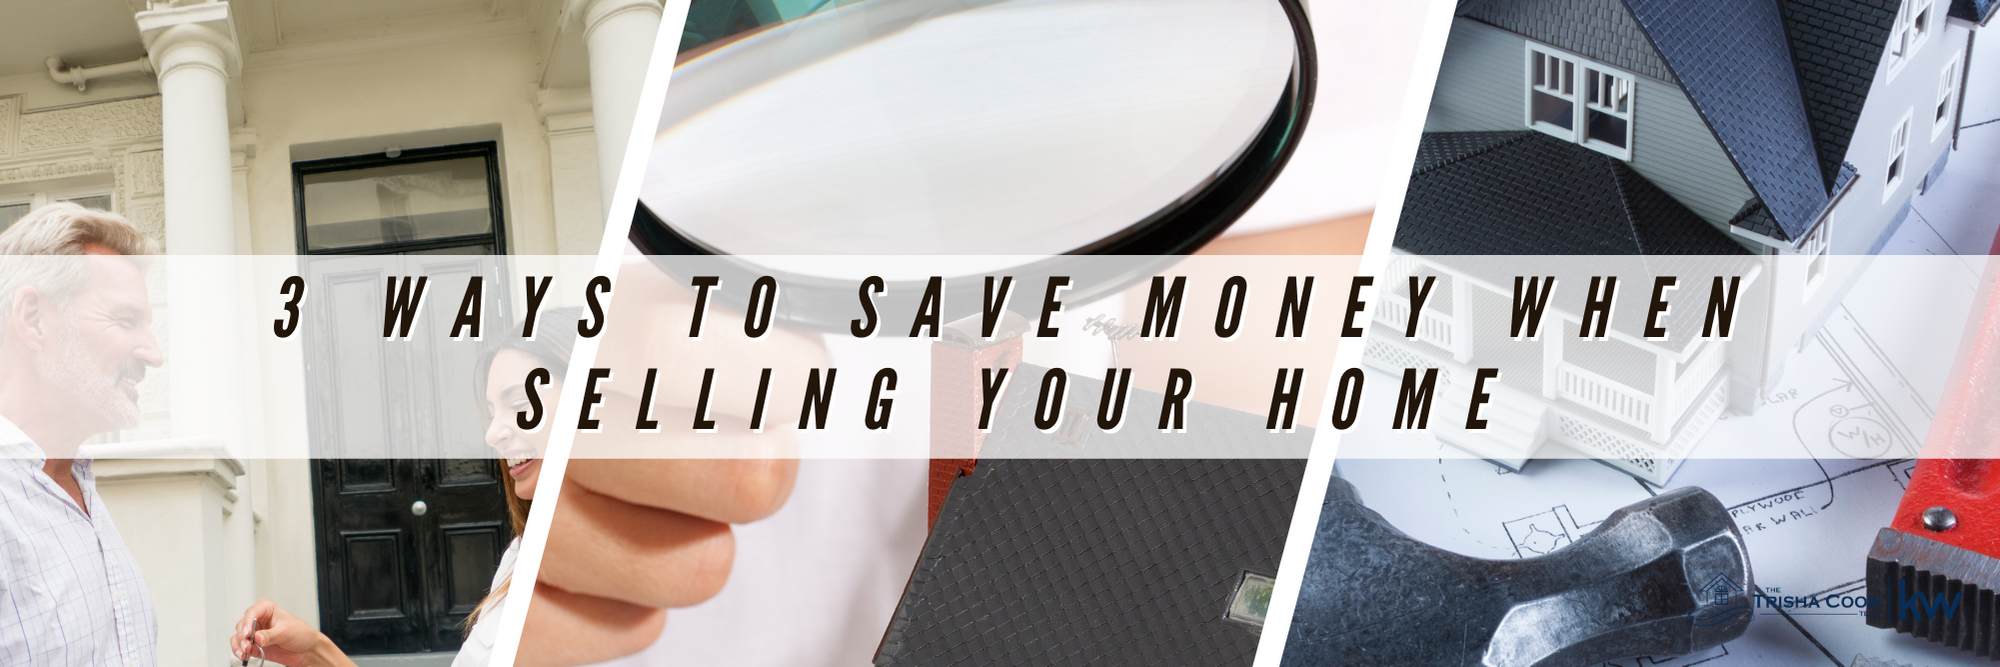 3 Ways to save money when selling your home.png